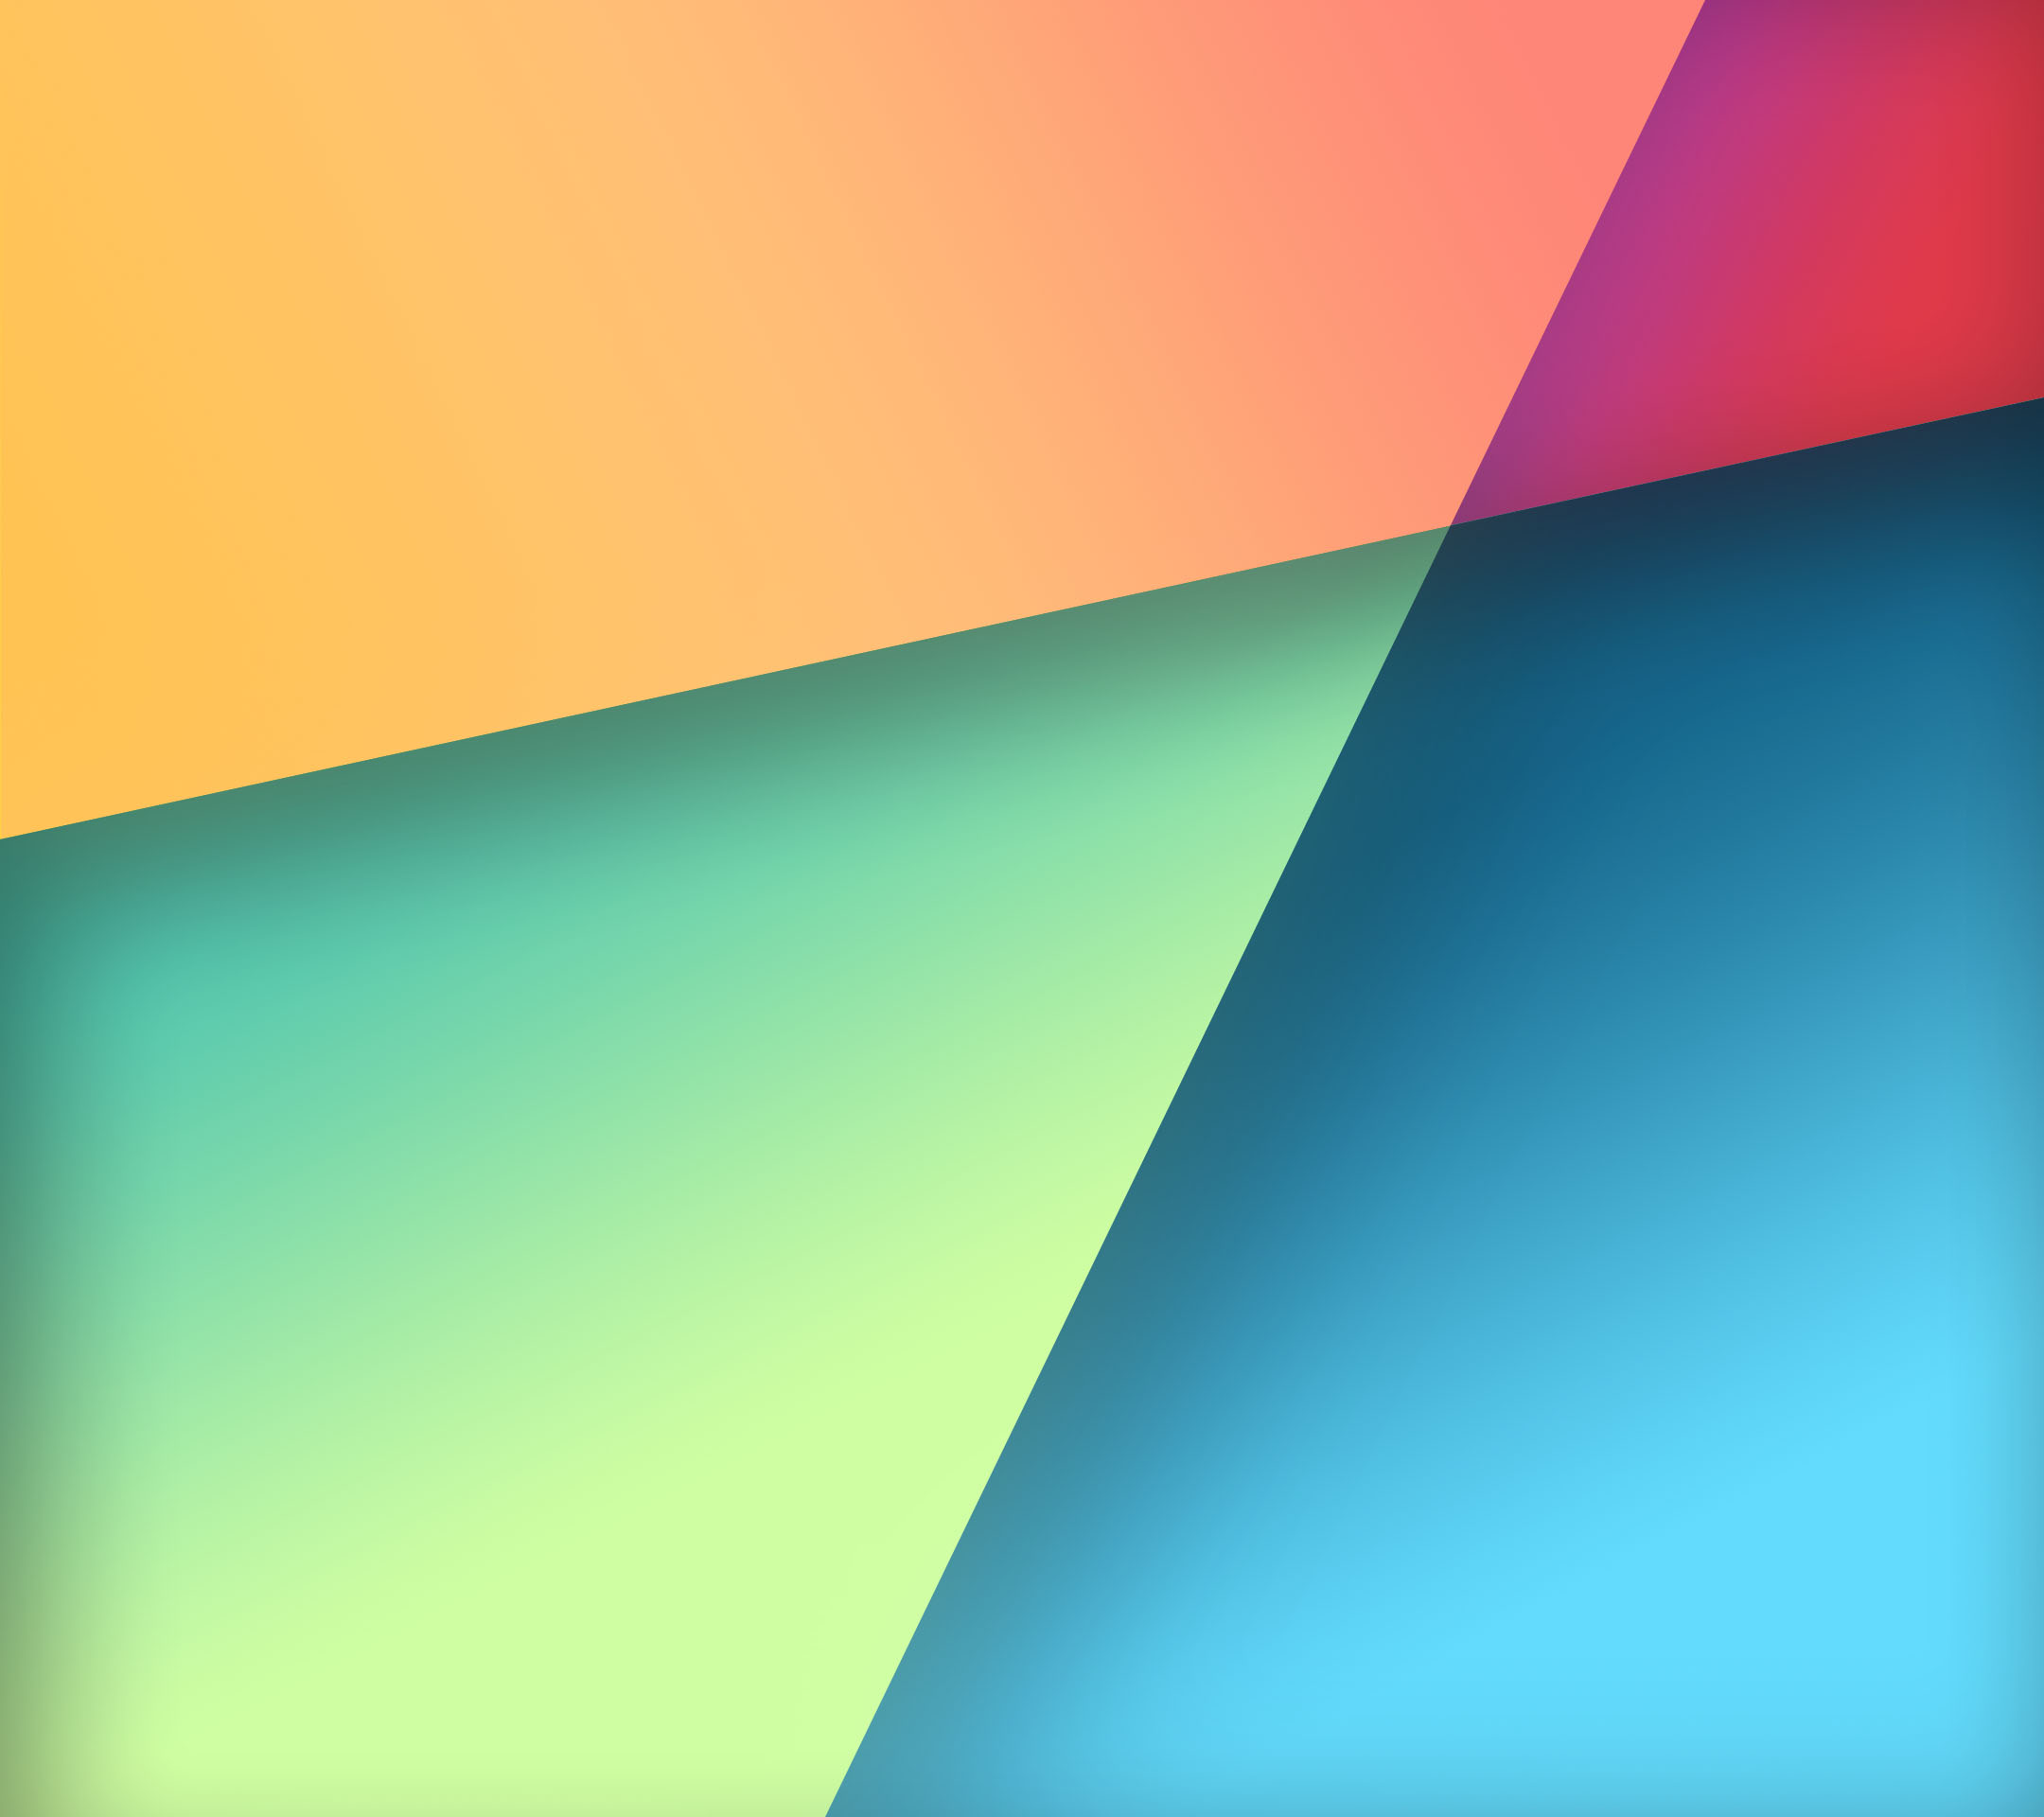 Nexus Stock Wallpaper In Google Play Colors By R3conn3r